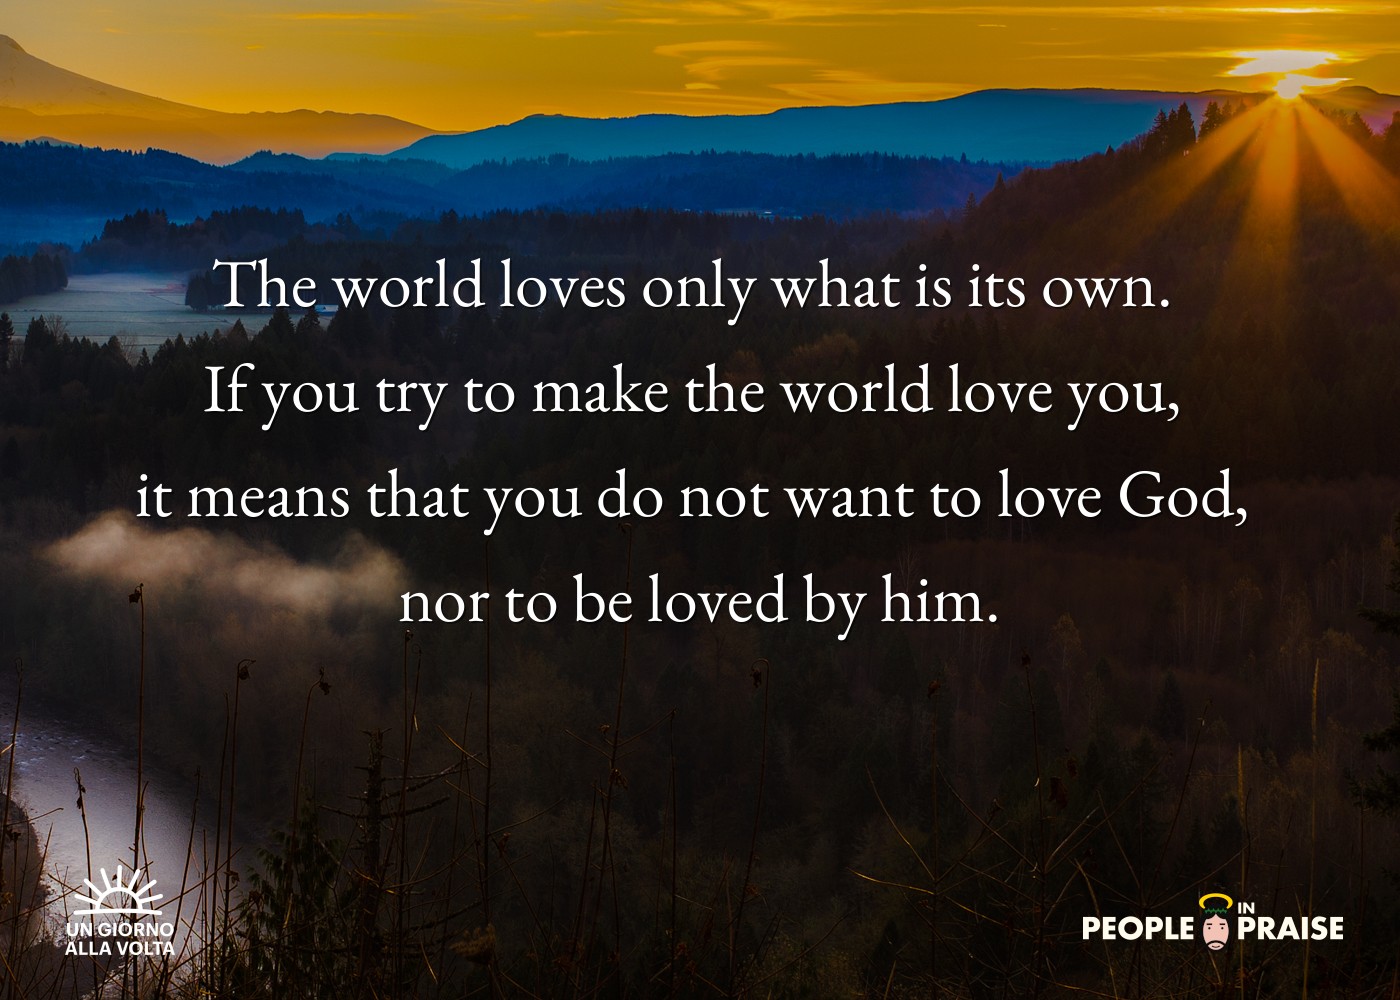 The world loves only what is its own. 
If you try to make the world love you, 
it means that you do not want to love God, 
nor to be loved by him.
